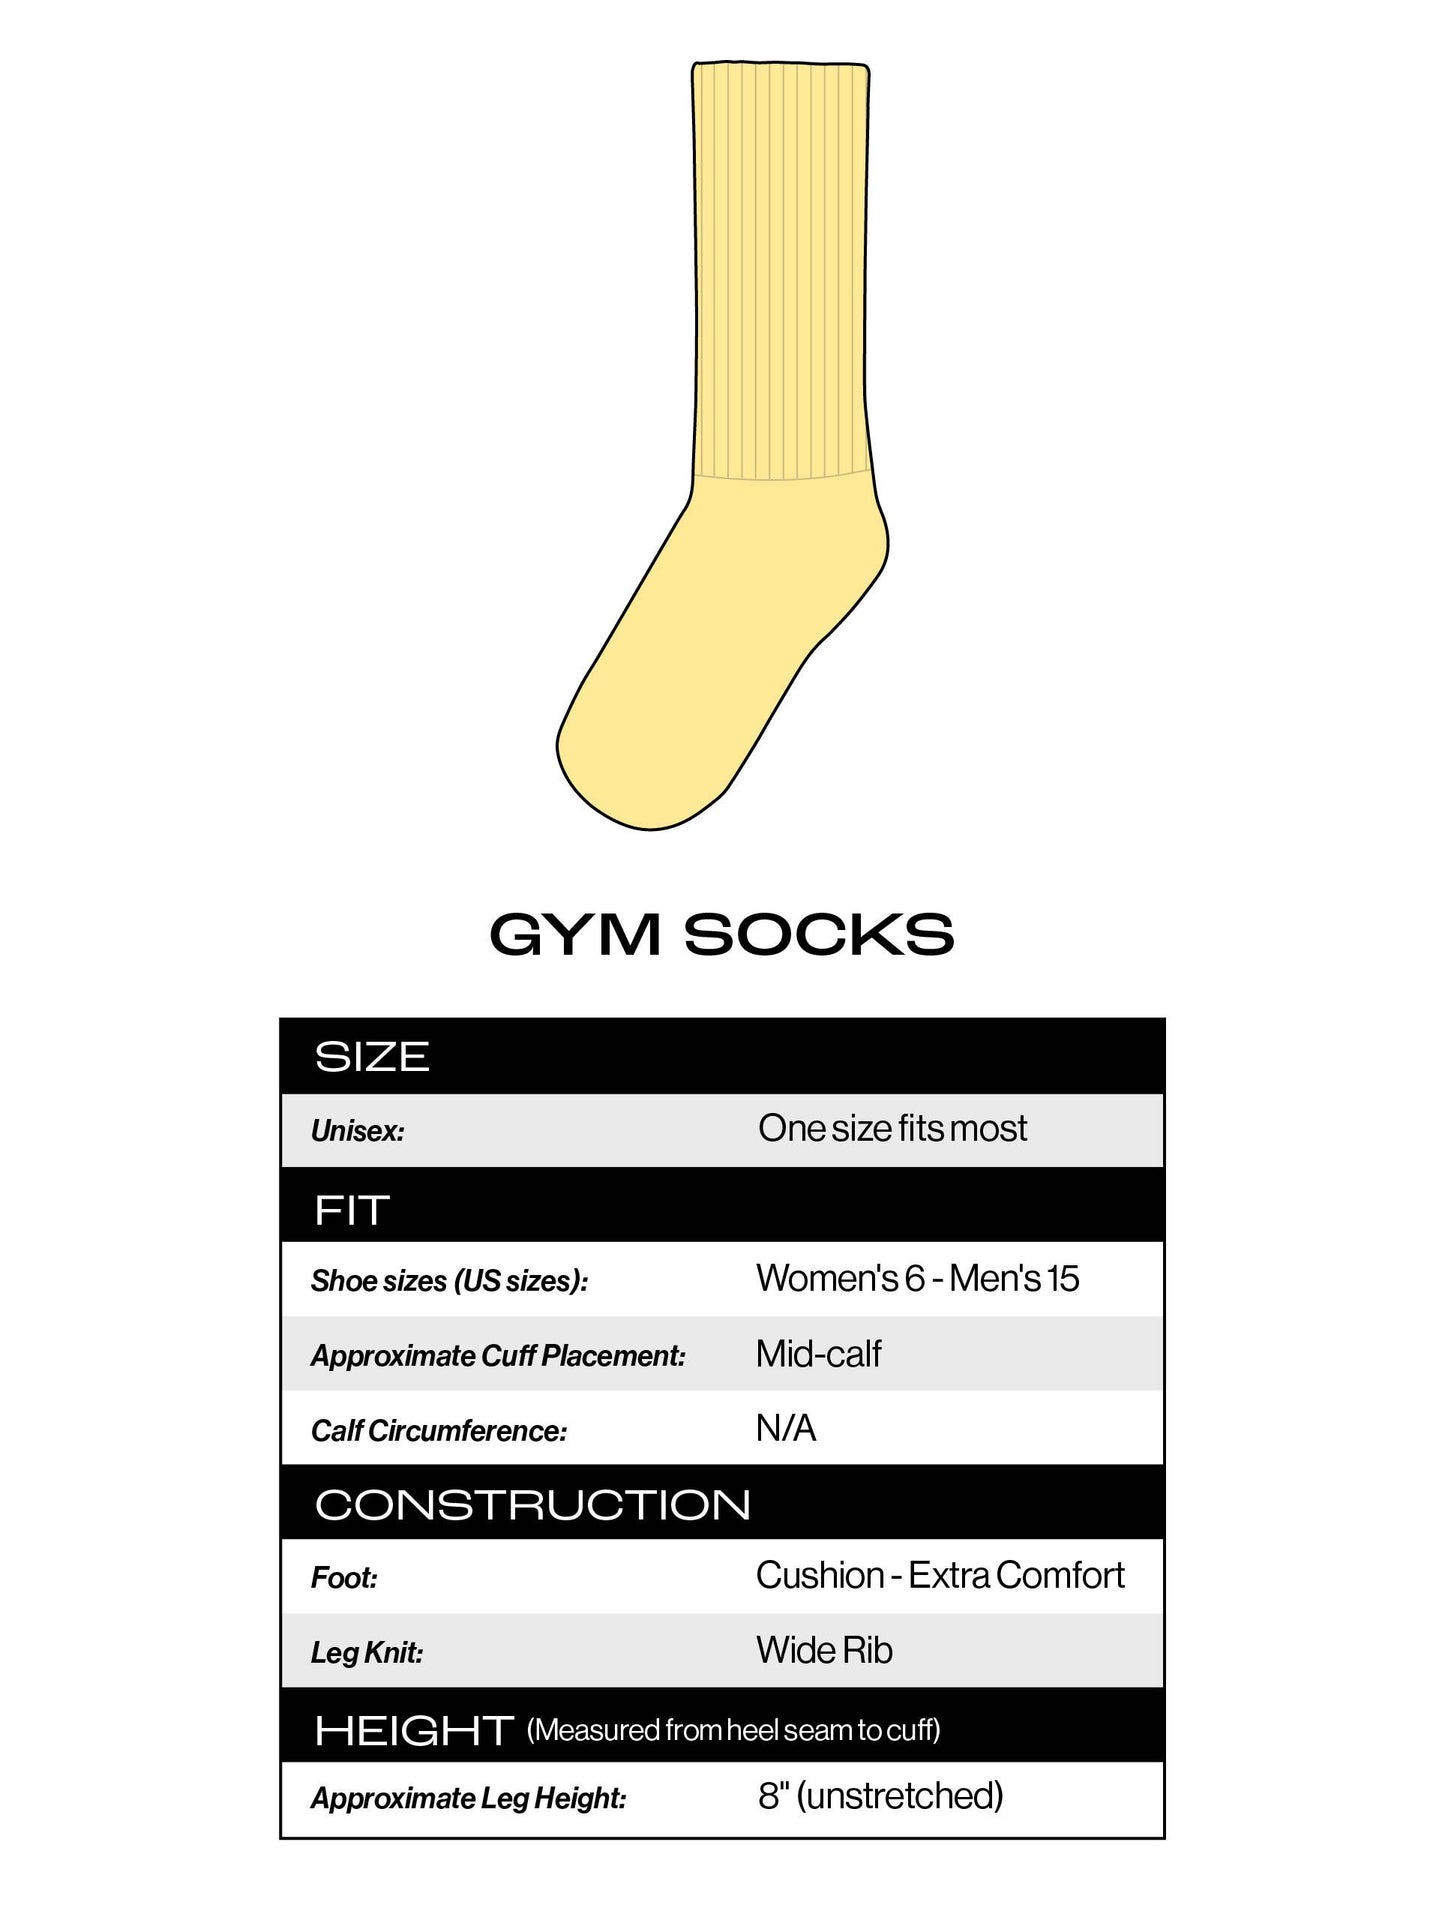 Be The Person Your Dog Thinks You Are Gym Crew Socks